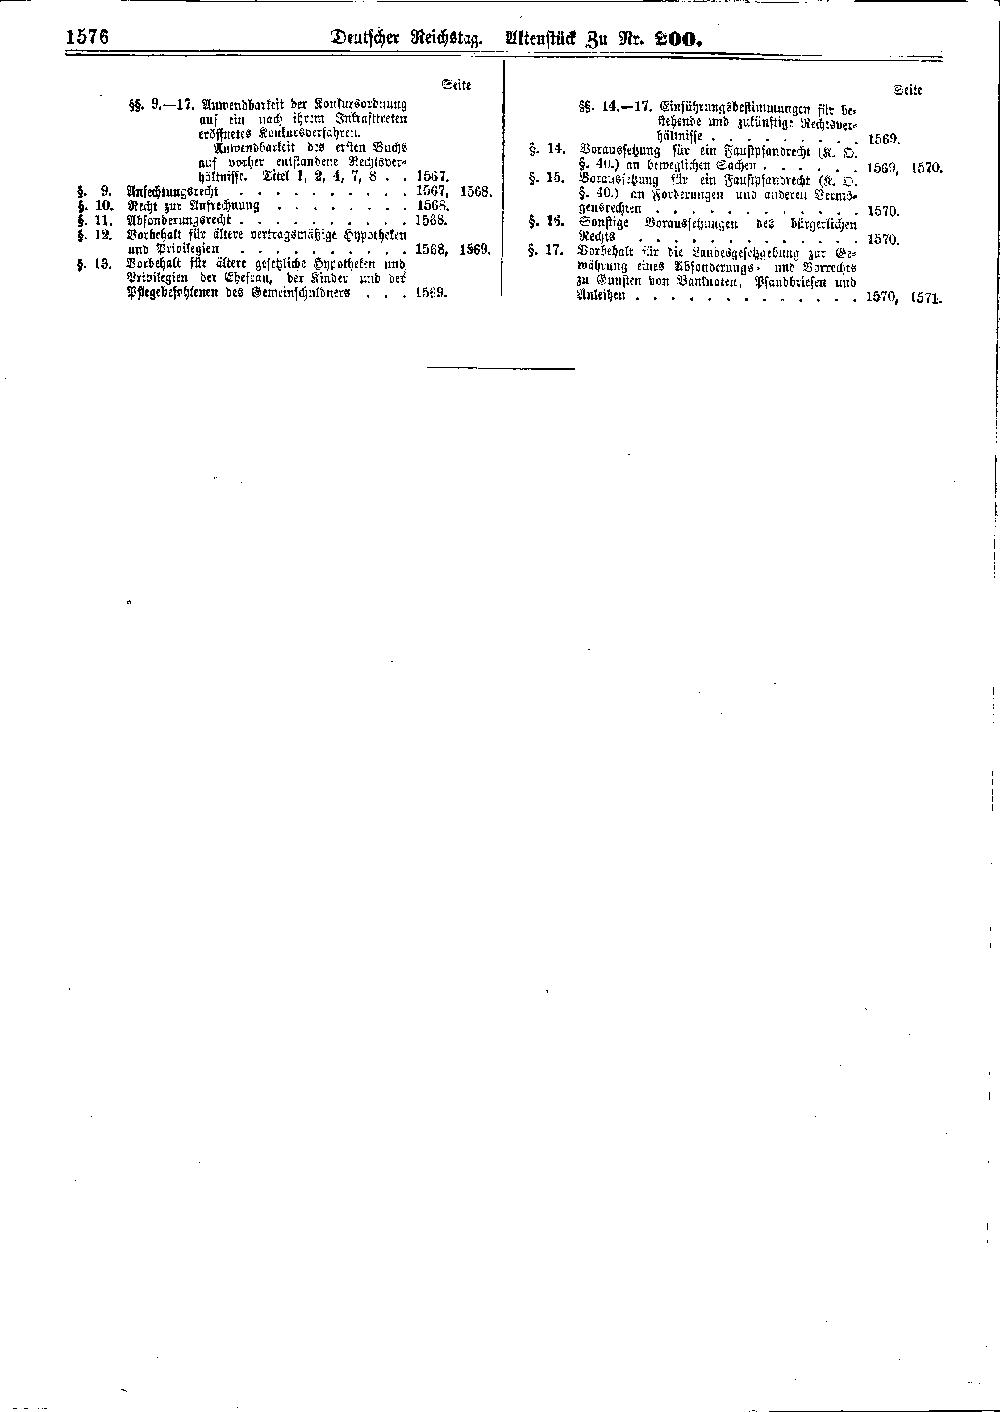 Scan of page 1576